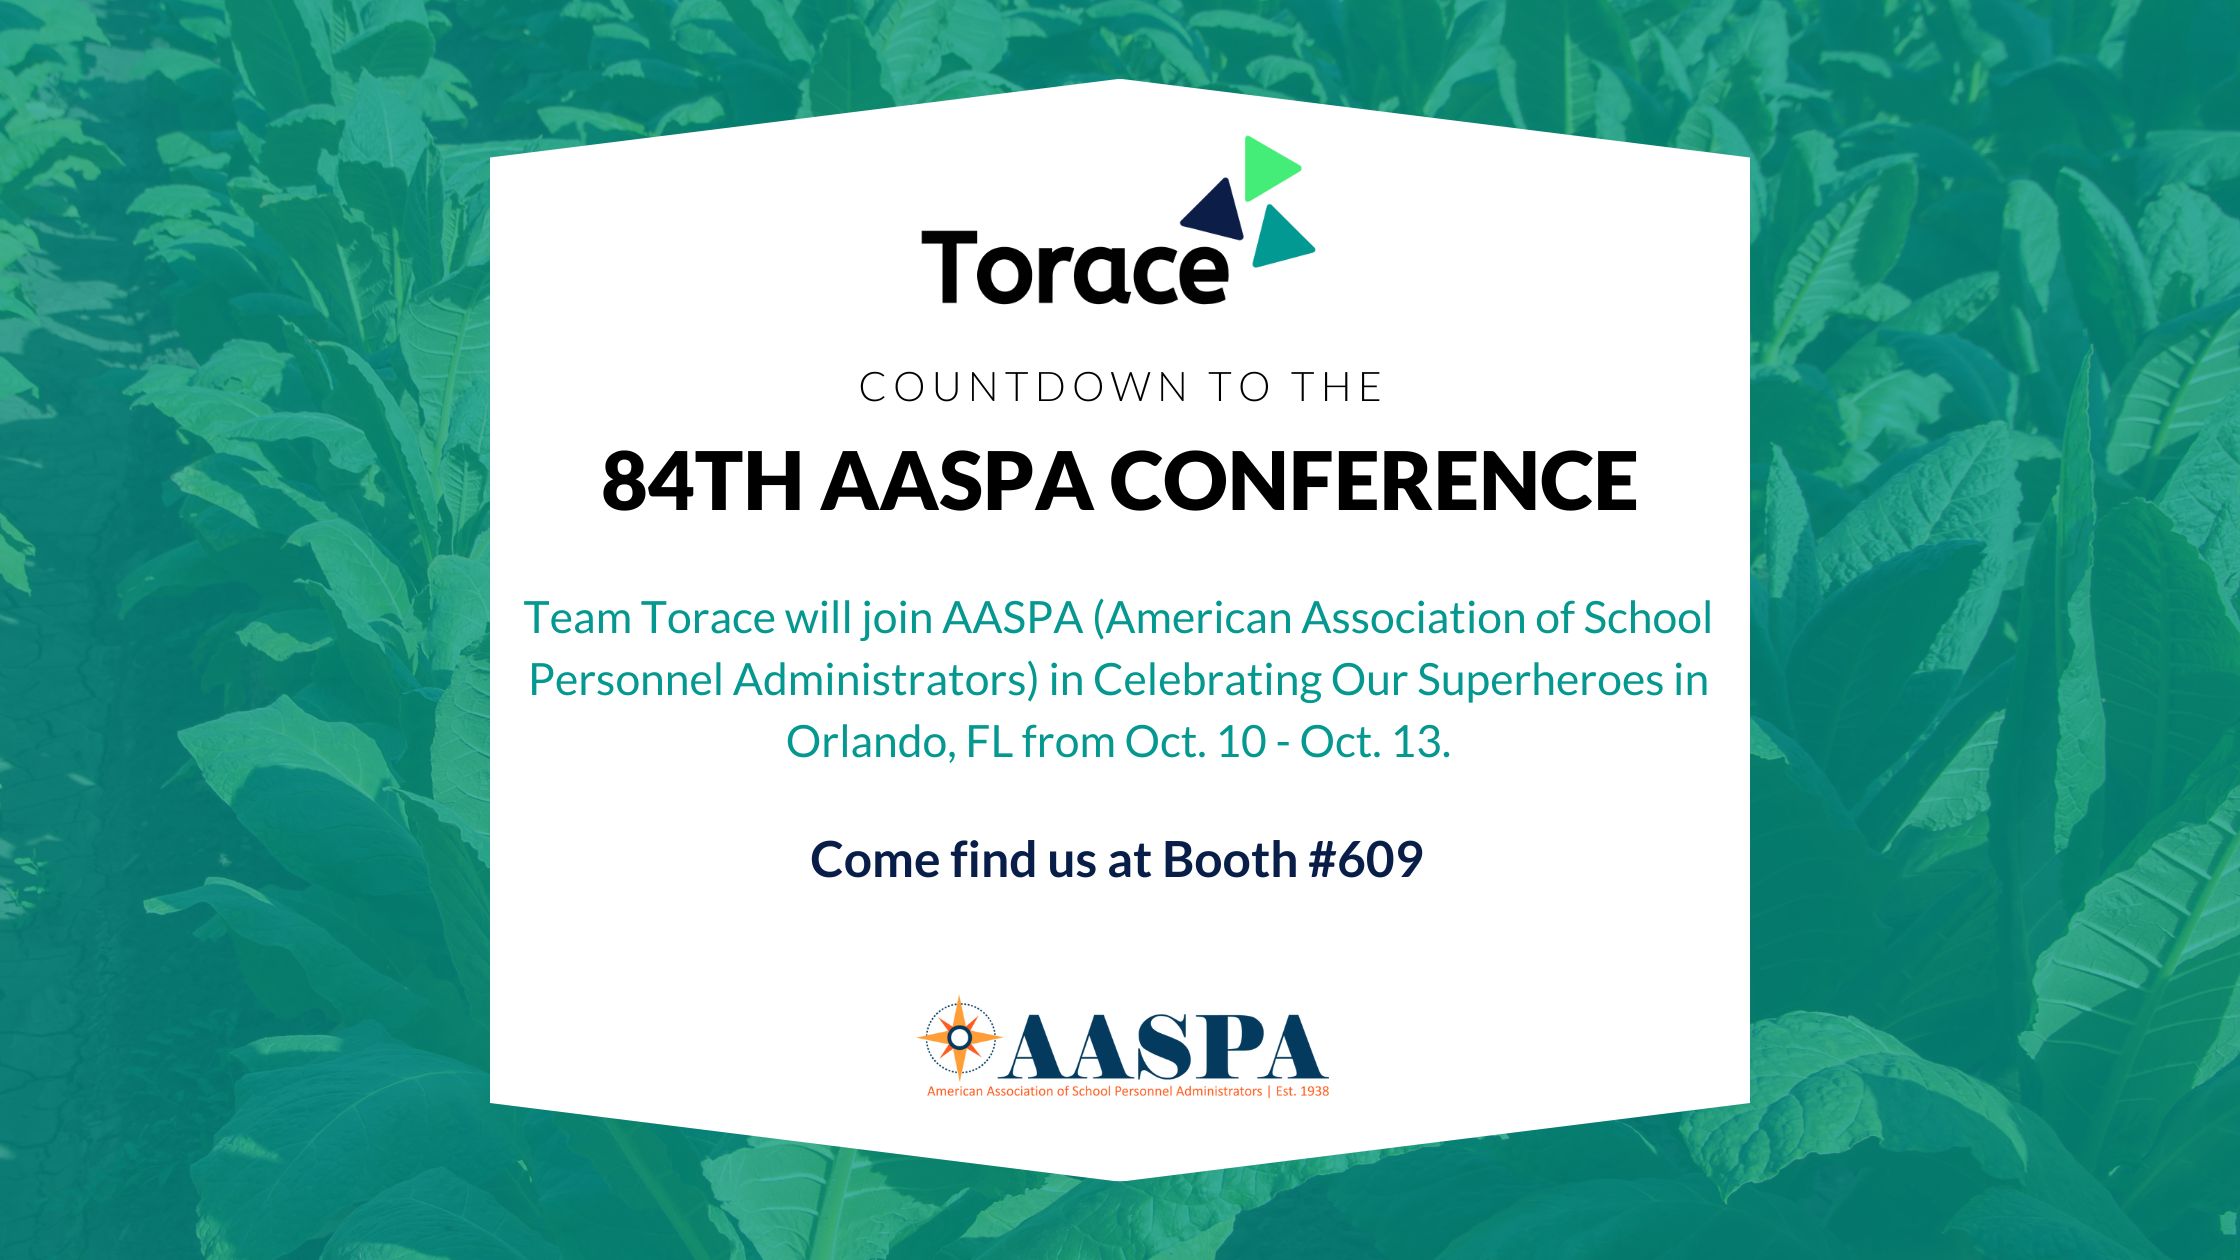 Countdown to AASPA
Team Torace will join AASPA (American Association of School Personnel Administrators) in Celebrating Our Superheroes in Orlando, FL from Oct. 10 - Oct. 13.
Come find us at Booth #609